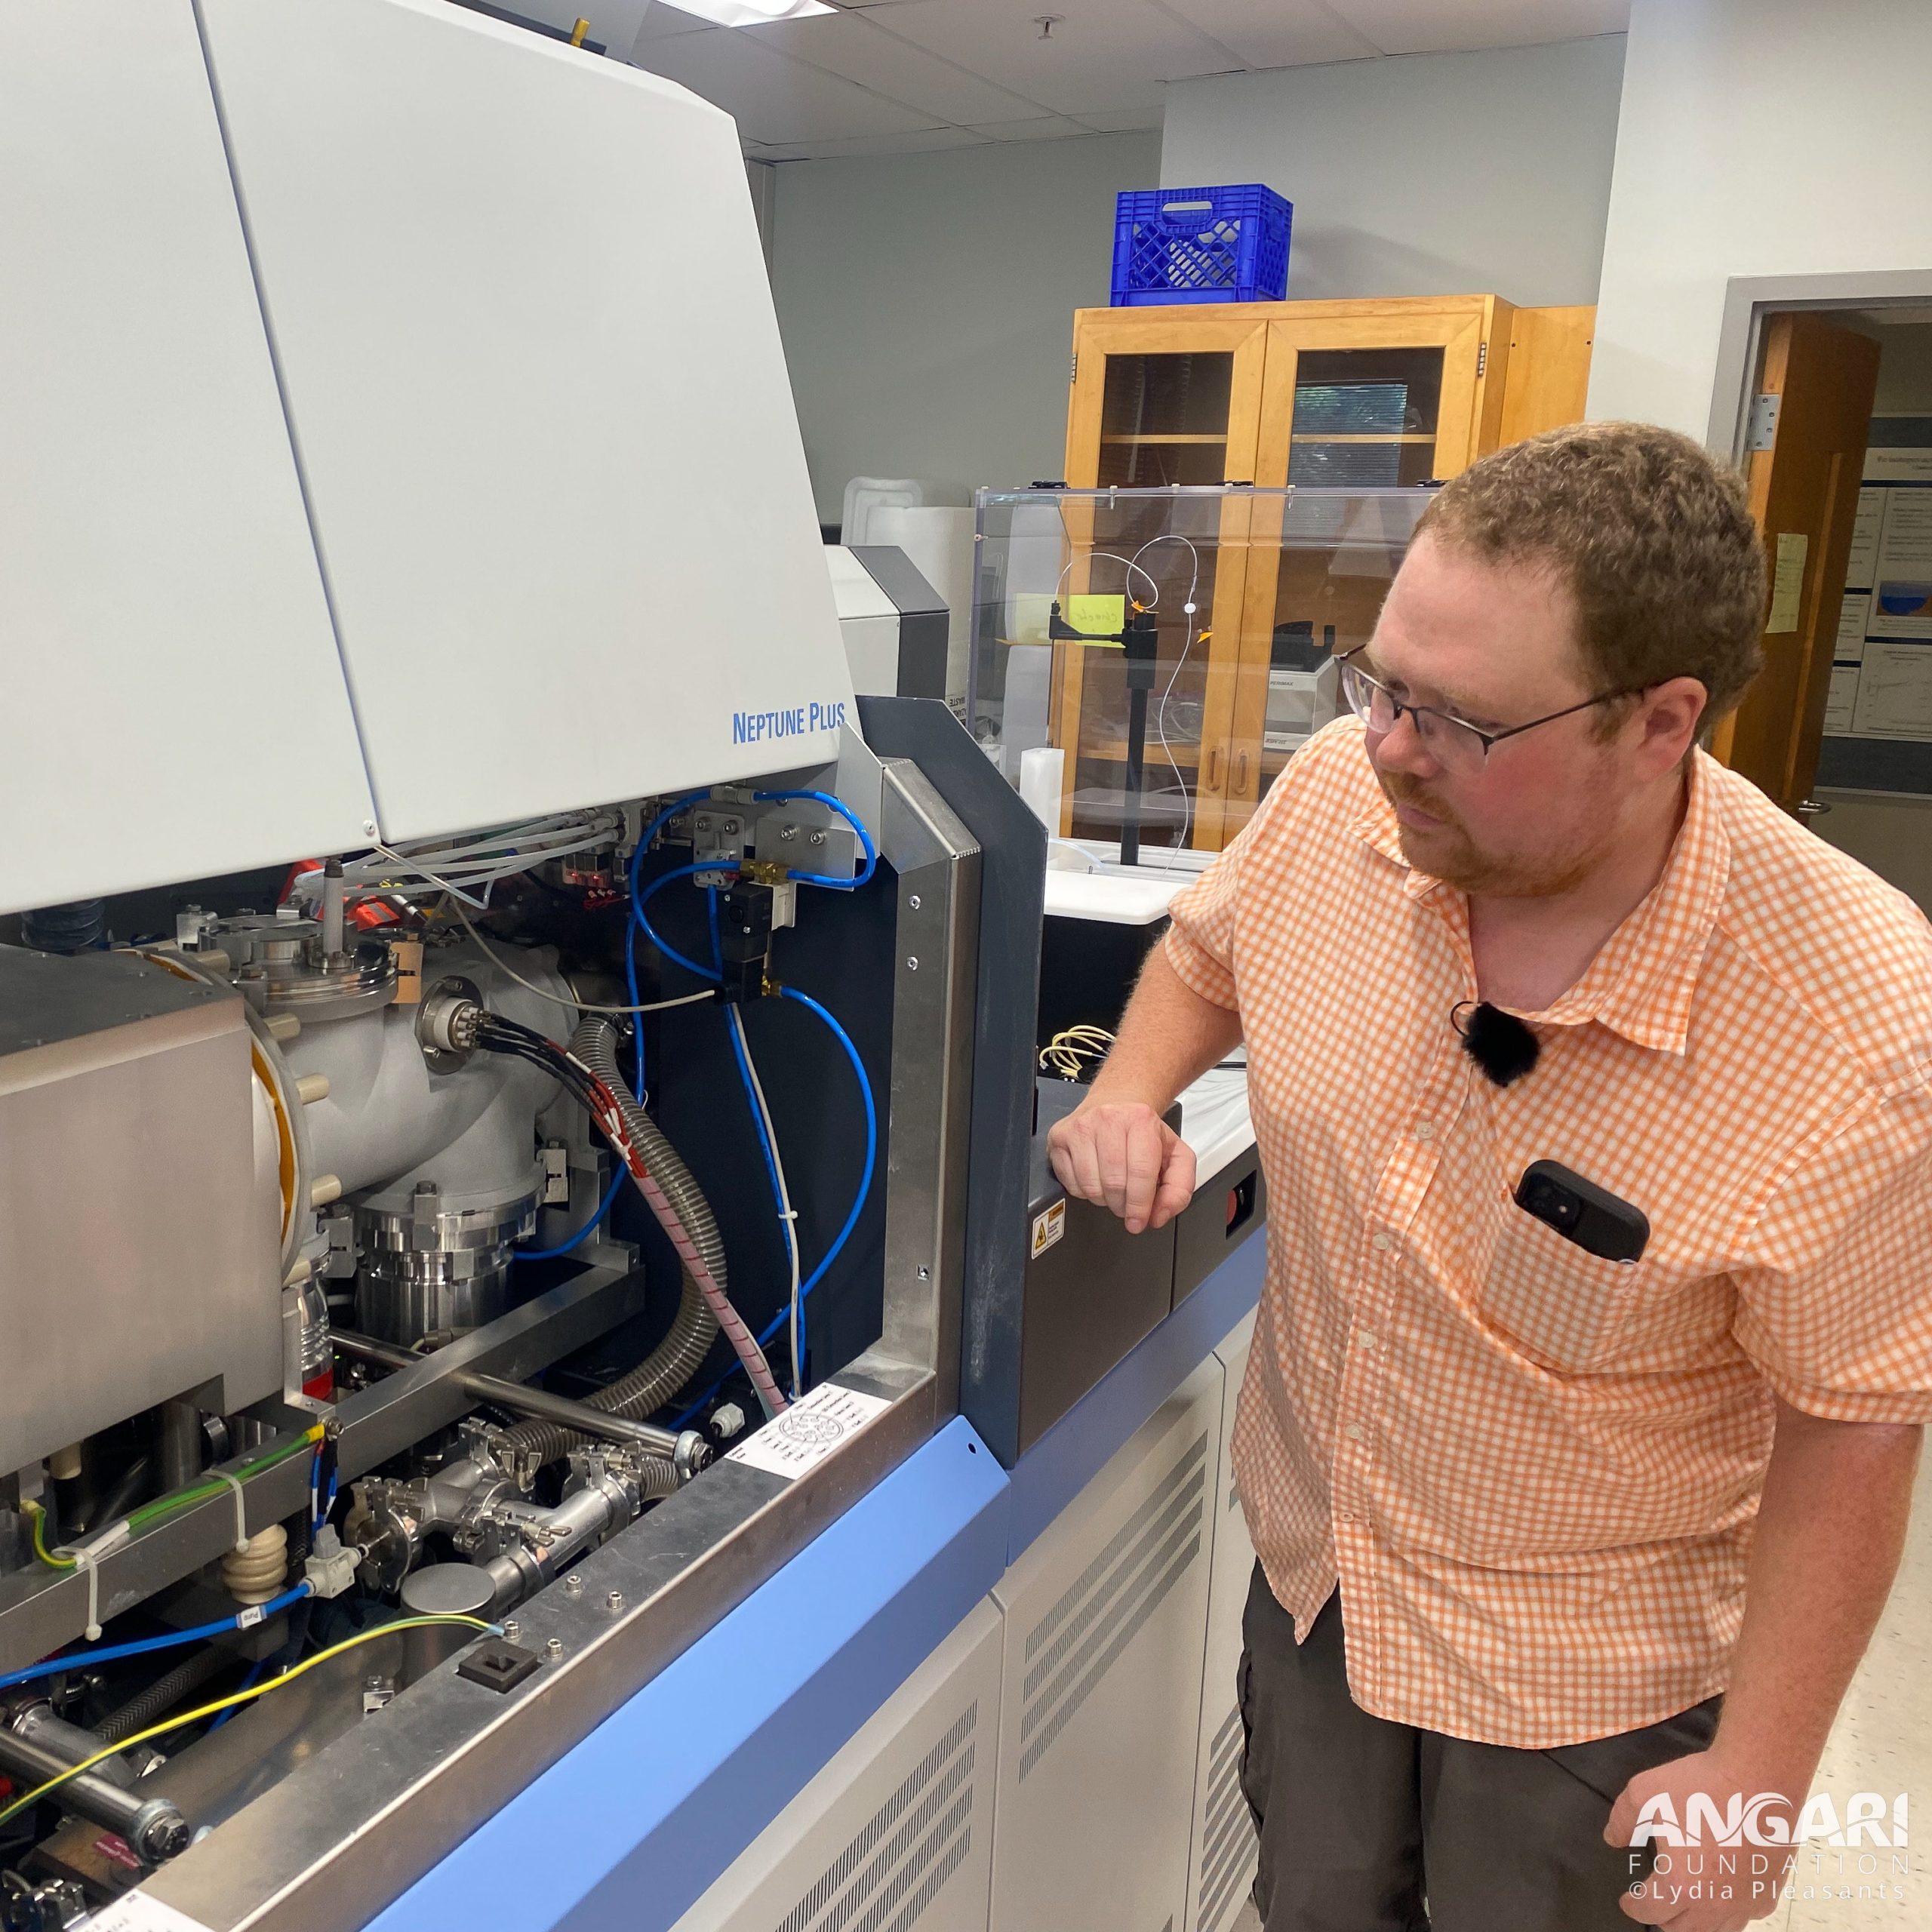 This is the Neptune mass-spectrometer, an instrument we use to analyze samples.